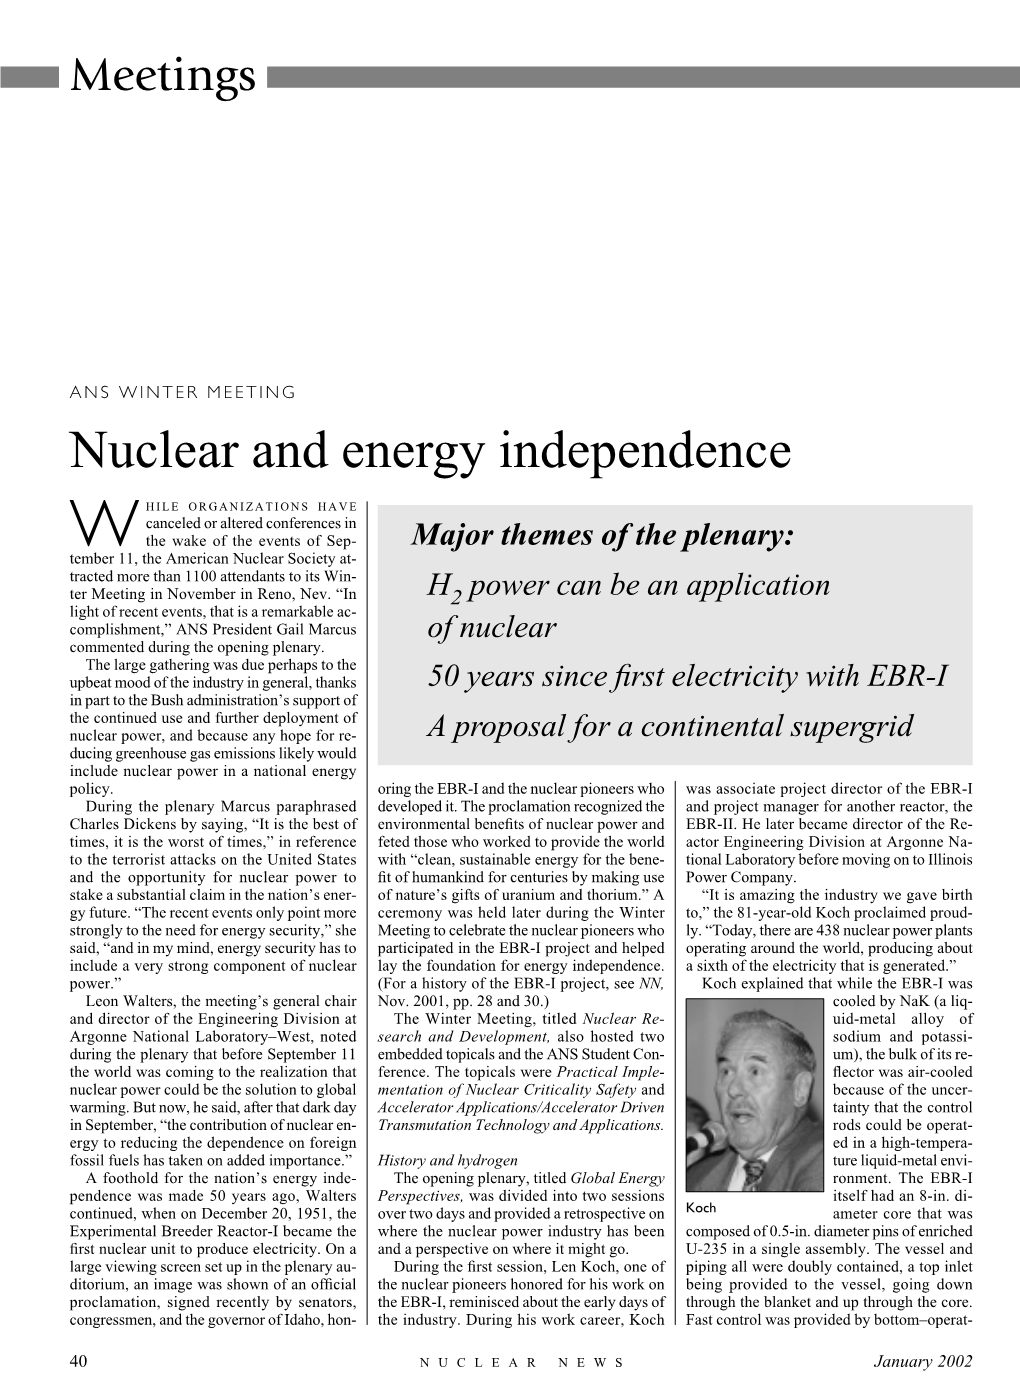 Nuclear and Energy Independence